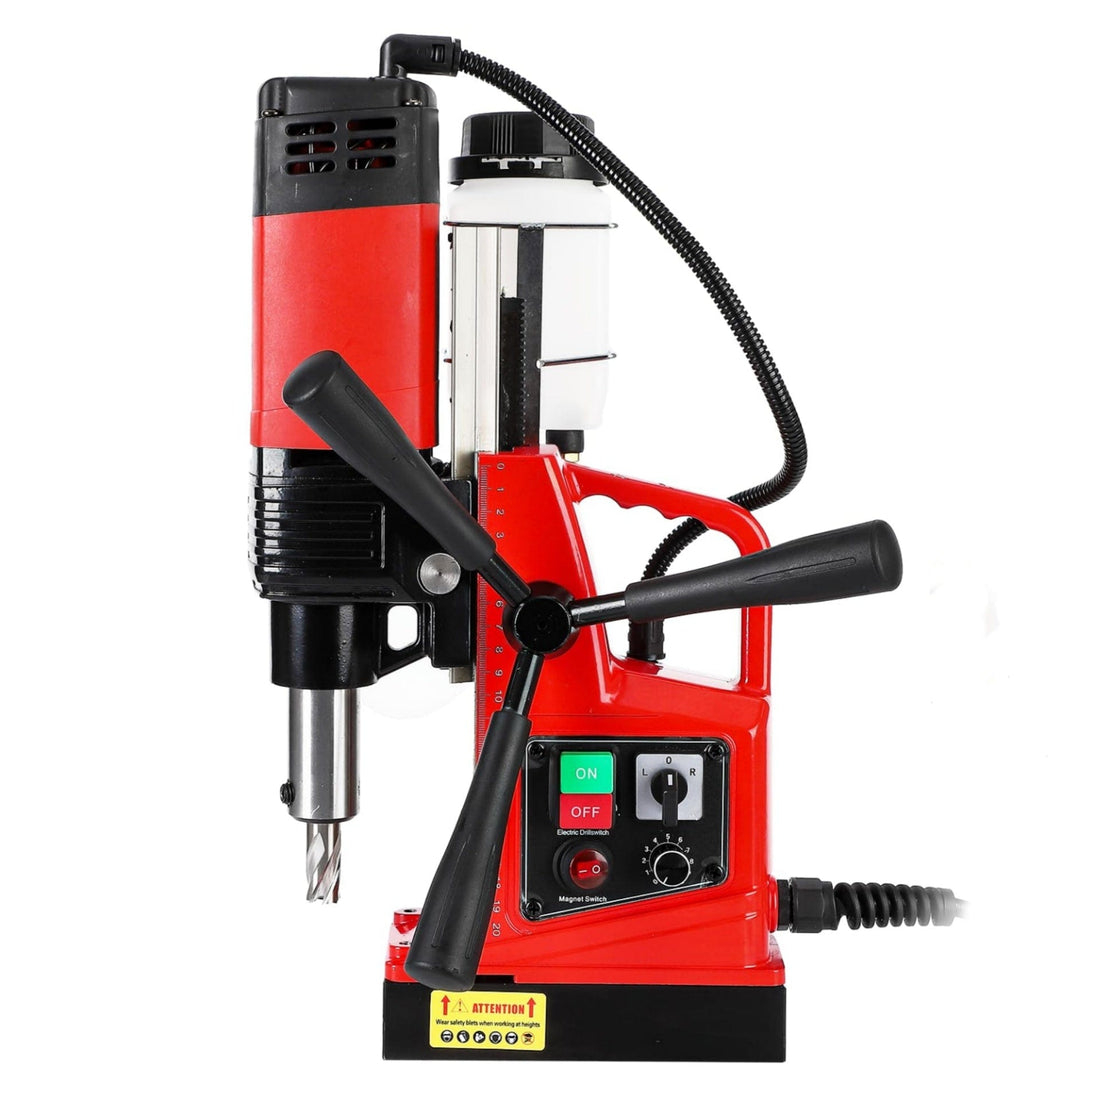 1.57 Inch 1300W Mag Drill Press,Dia 2922lbf for Industrial Use